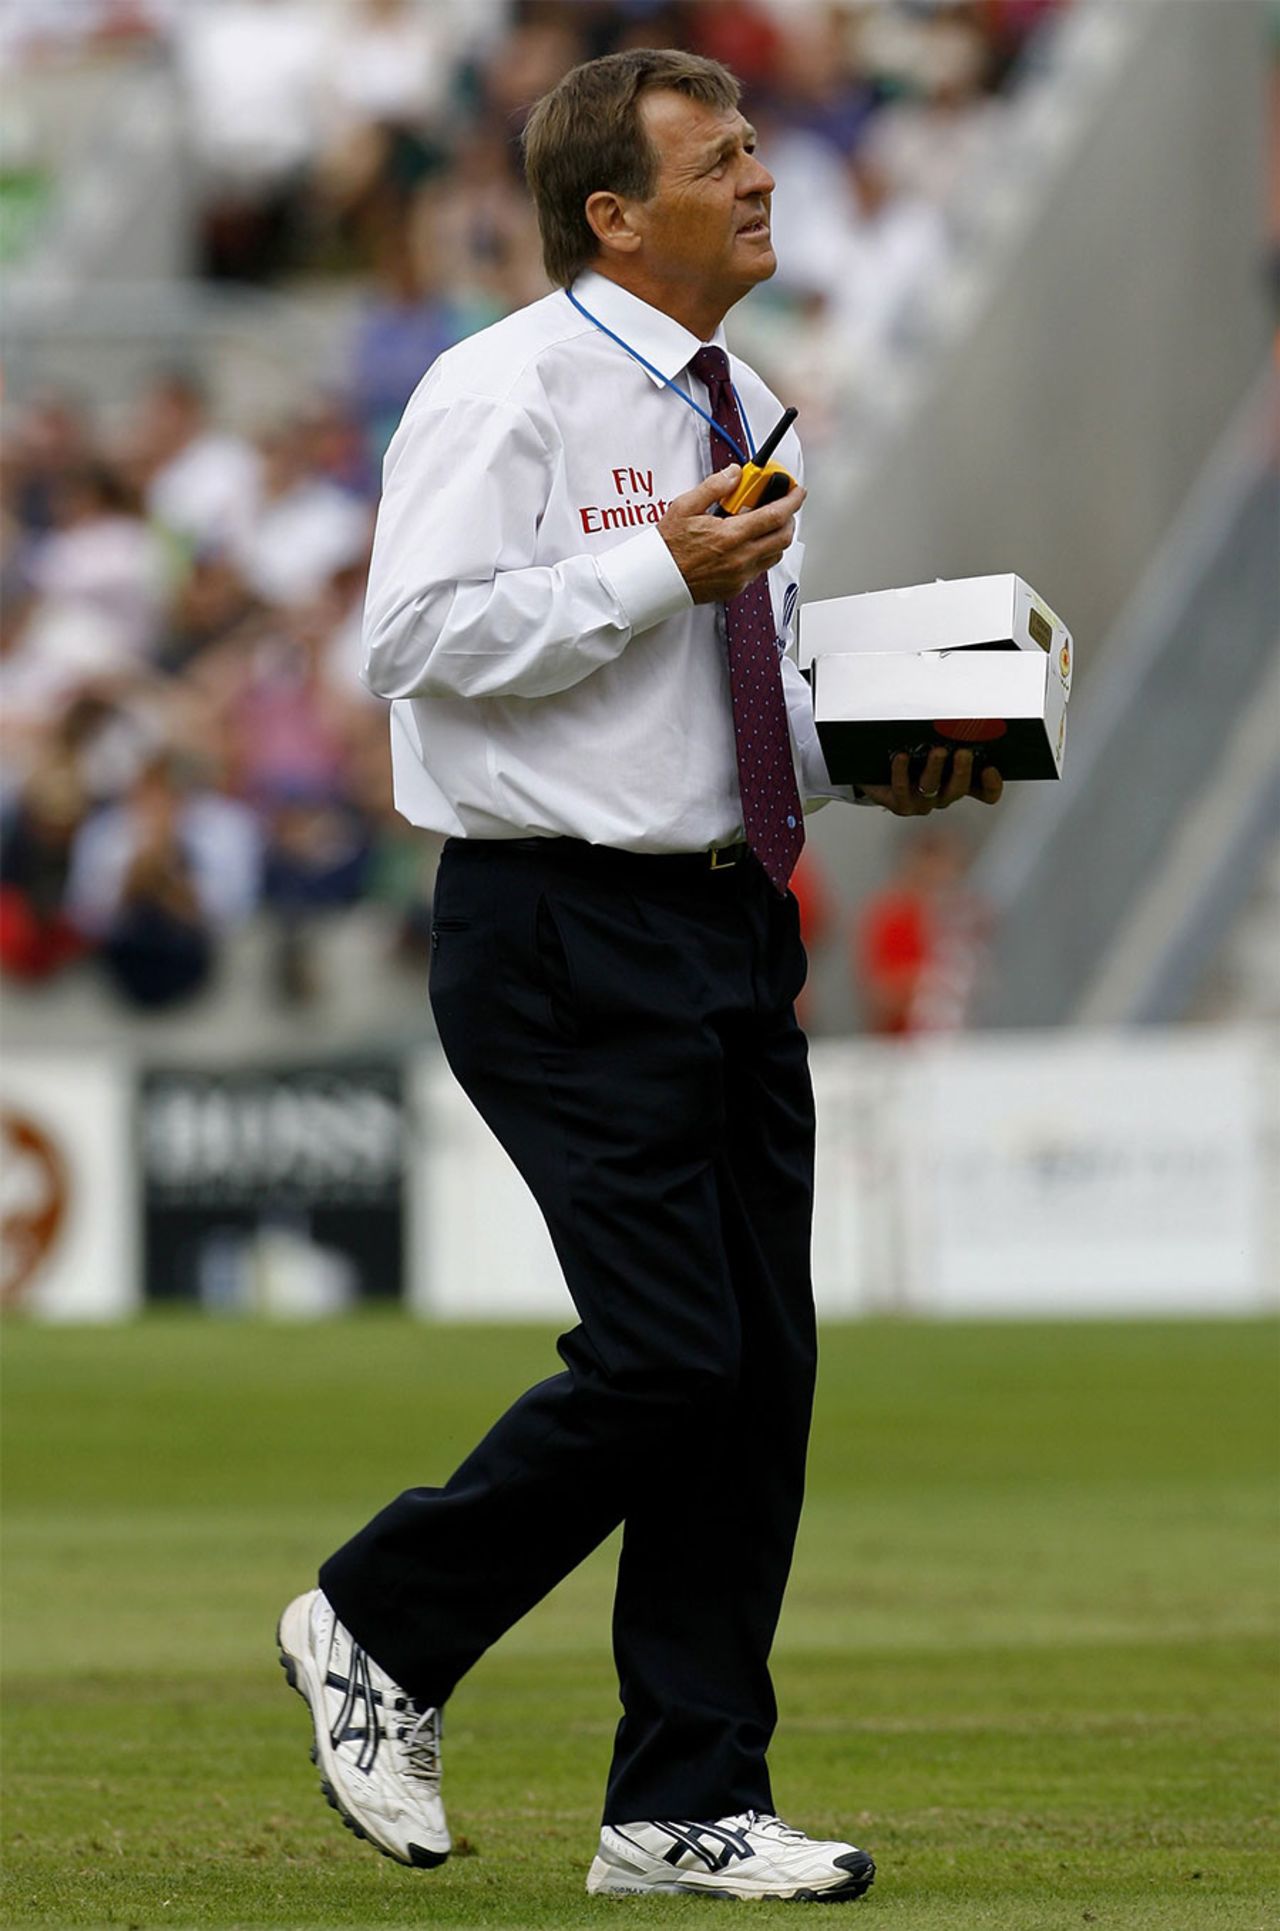 Trevor Jesty with the box of new balls after the umpires called for change, England v Pakistan, 4th Test, The Oval, August 20, 2006